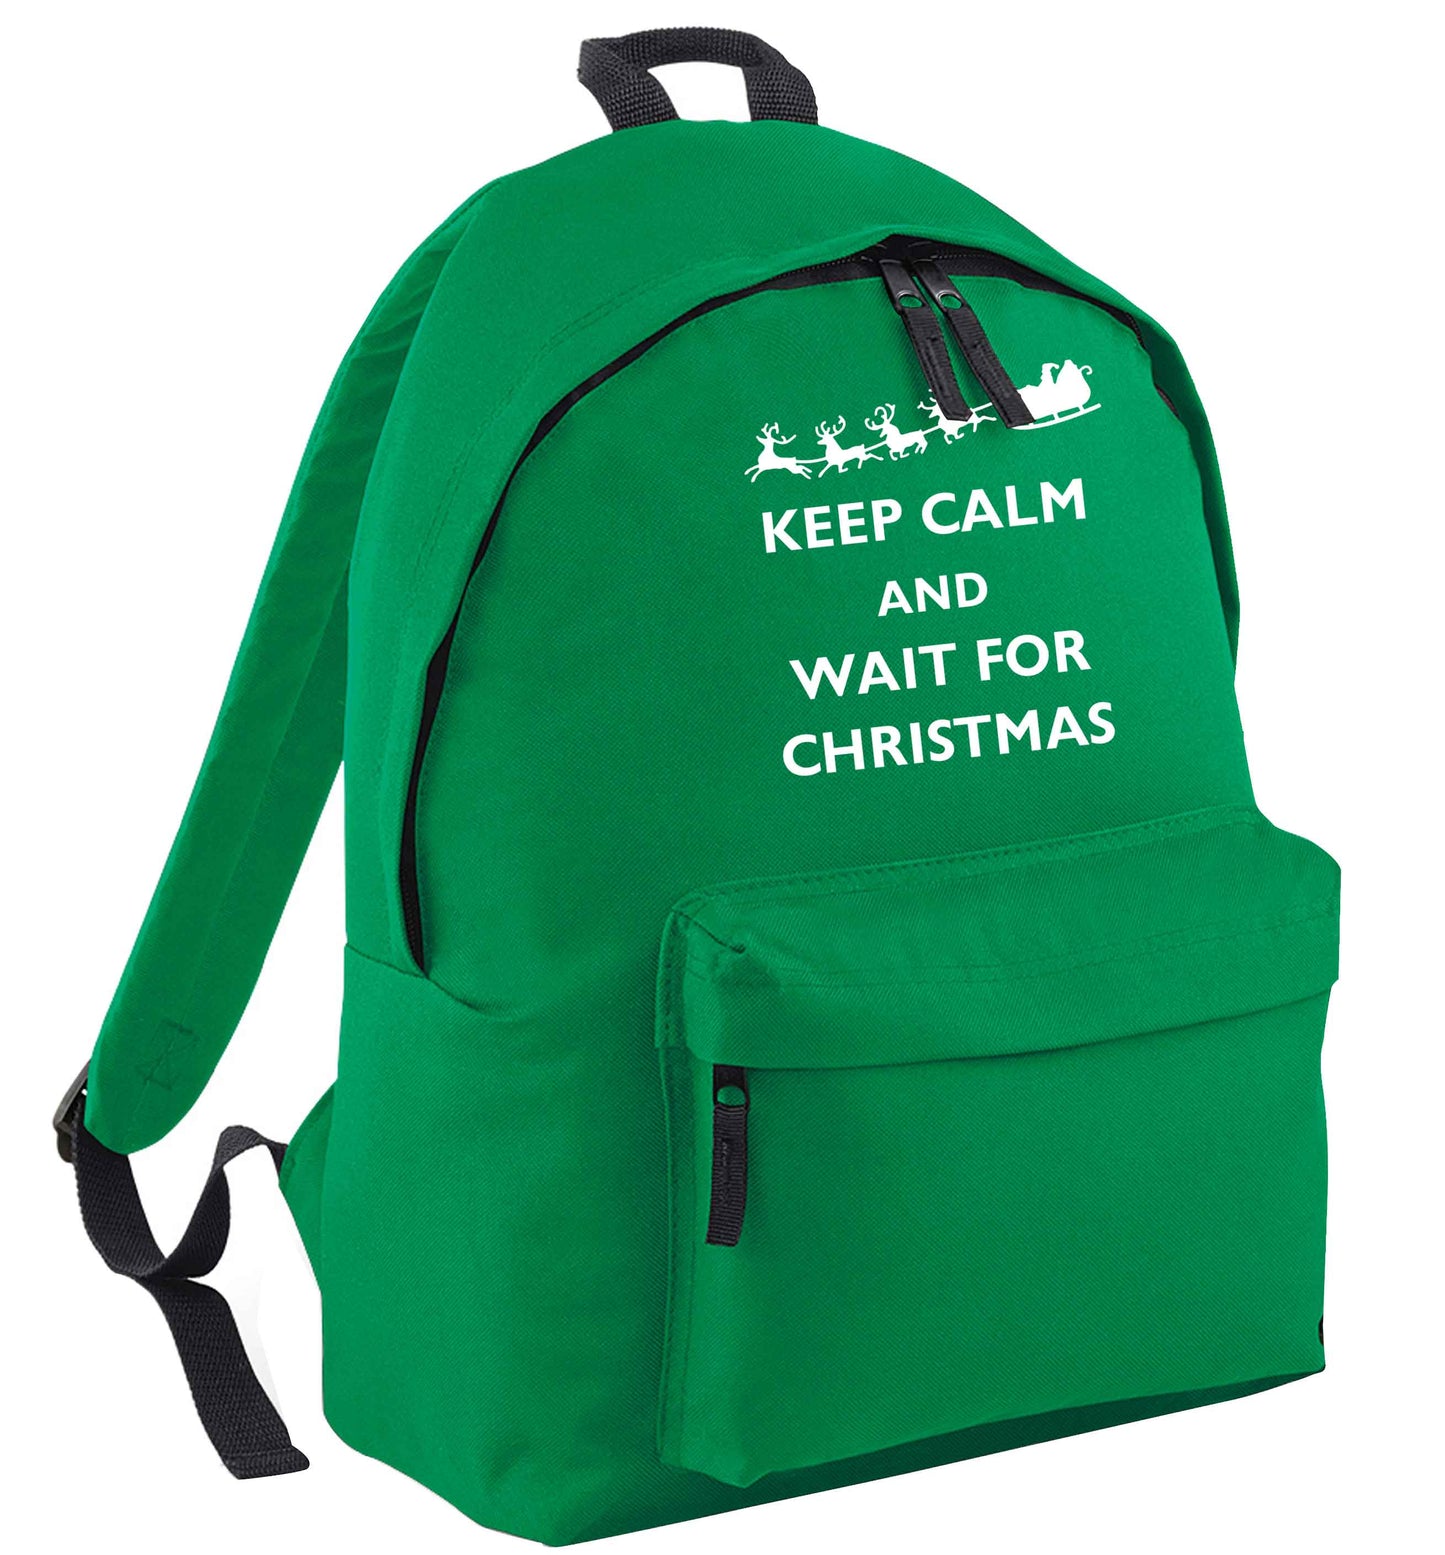 Keep calm and wait for Christmas green adults backpack